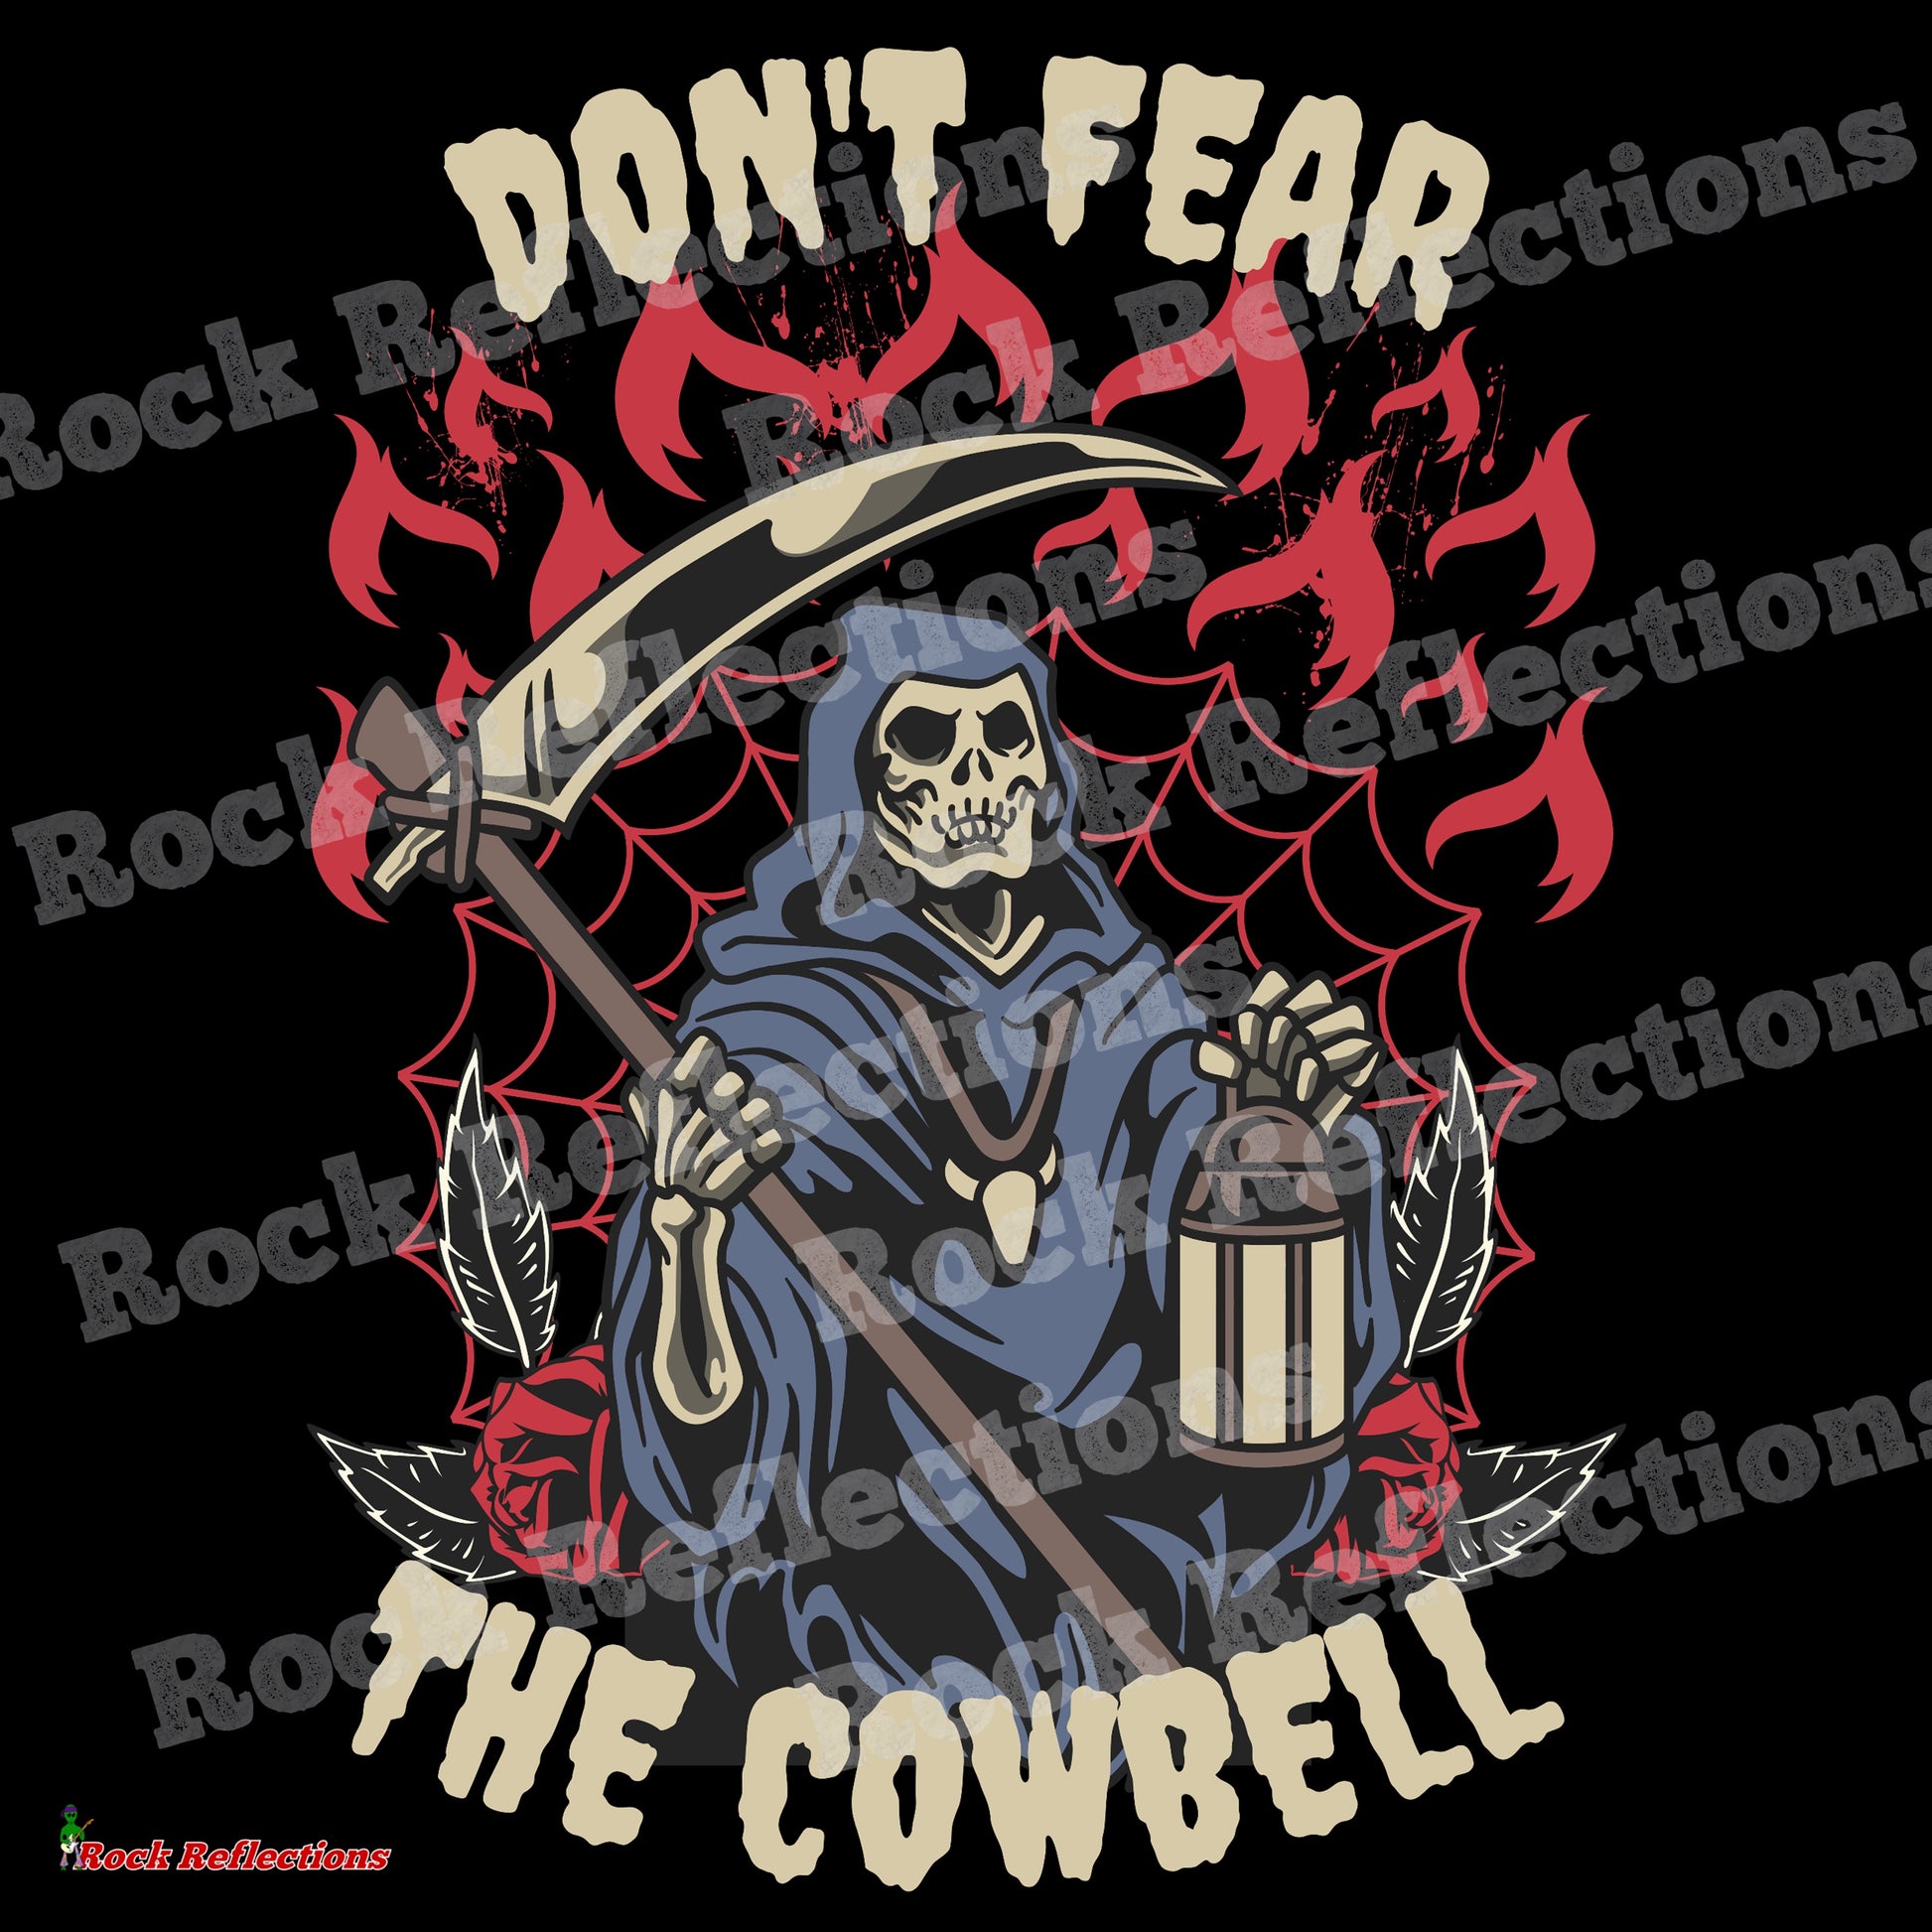 Don't Fear The Cowbell T-Shirt SPOD